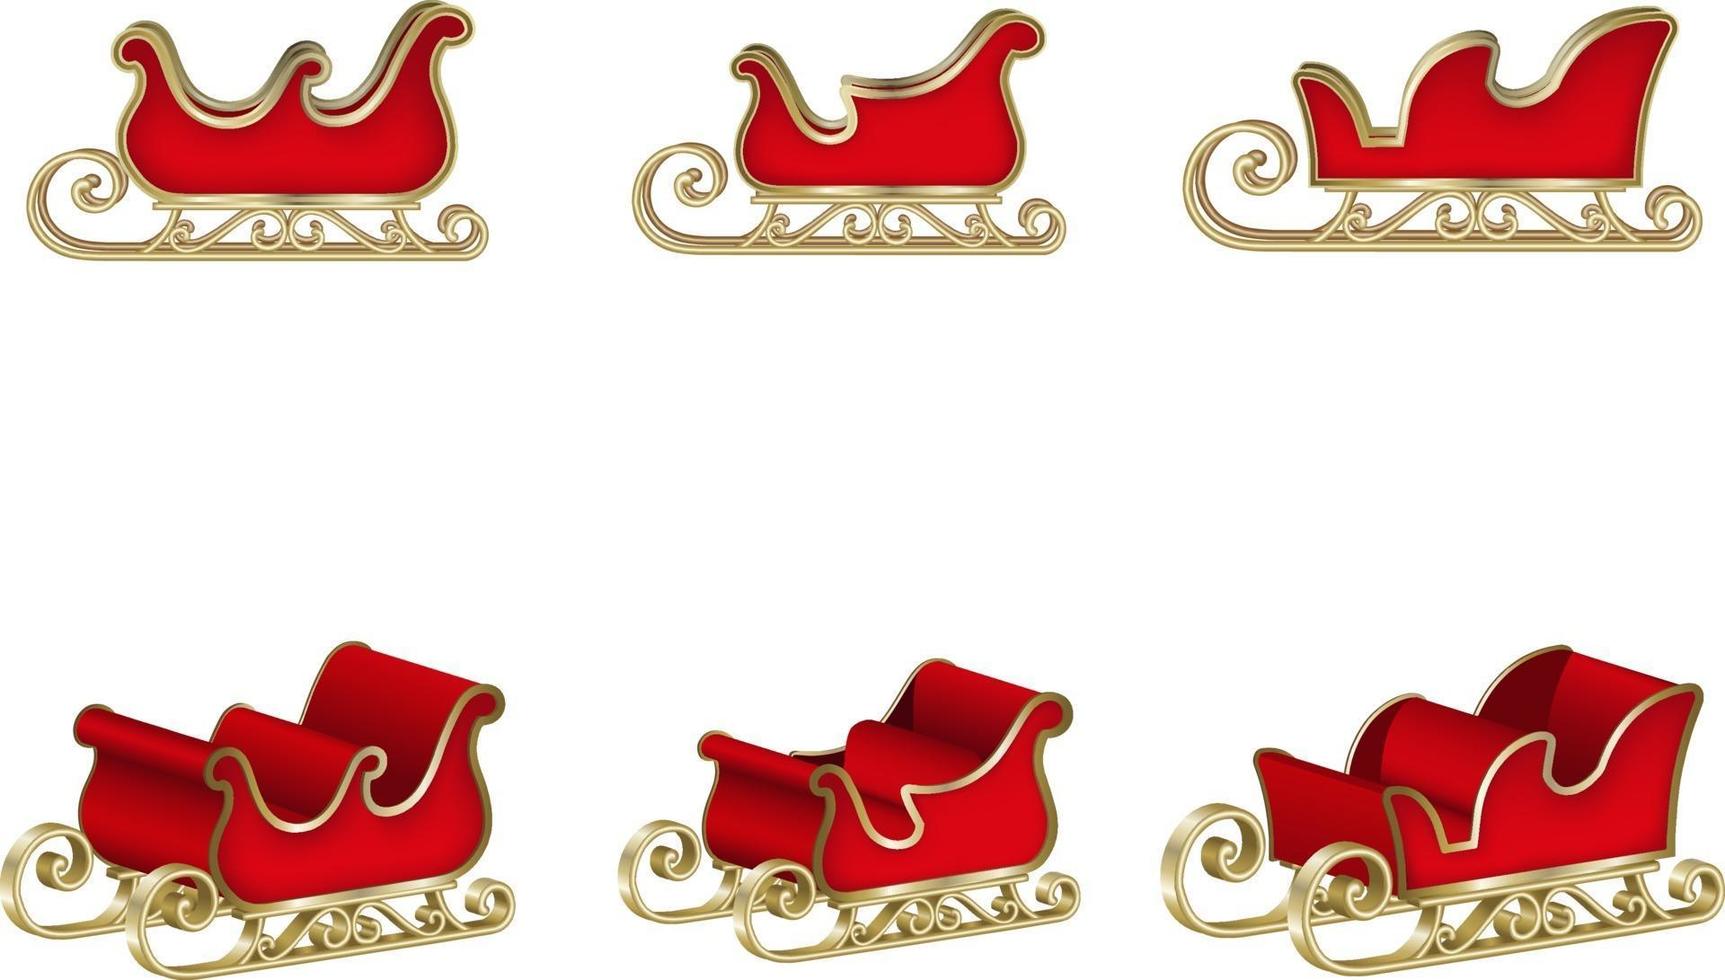 Isolated Santa Claus sleigh for Christmas decorations vector